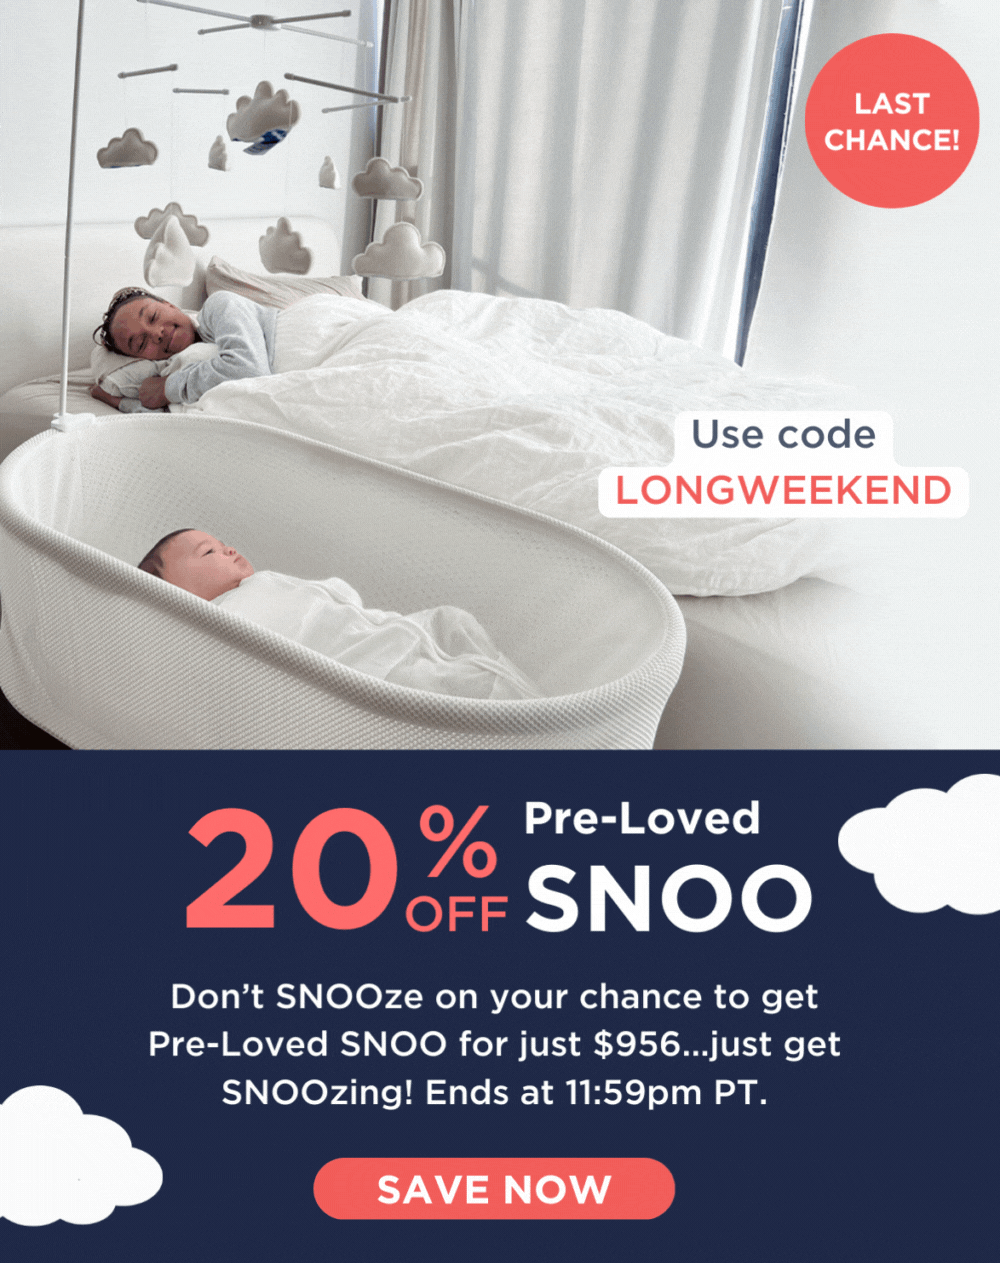 LAST CHANCE! Use code LONGWEEKEND. 20% OFF Pre-Loved SNOO! Don’t SNOOze on your chance to get Pre-Loved SNOO for just \\$956...just get SNOOzing! Ends at 11:59pm PT. SAVE NOW